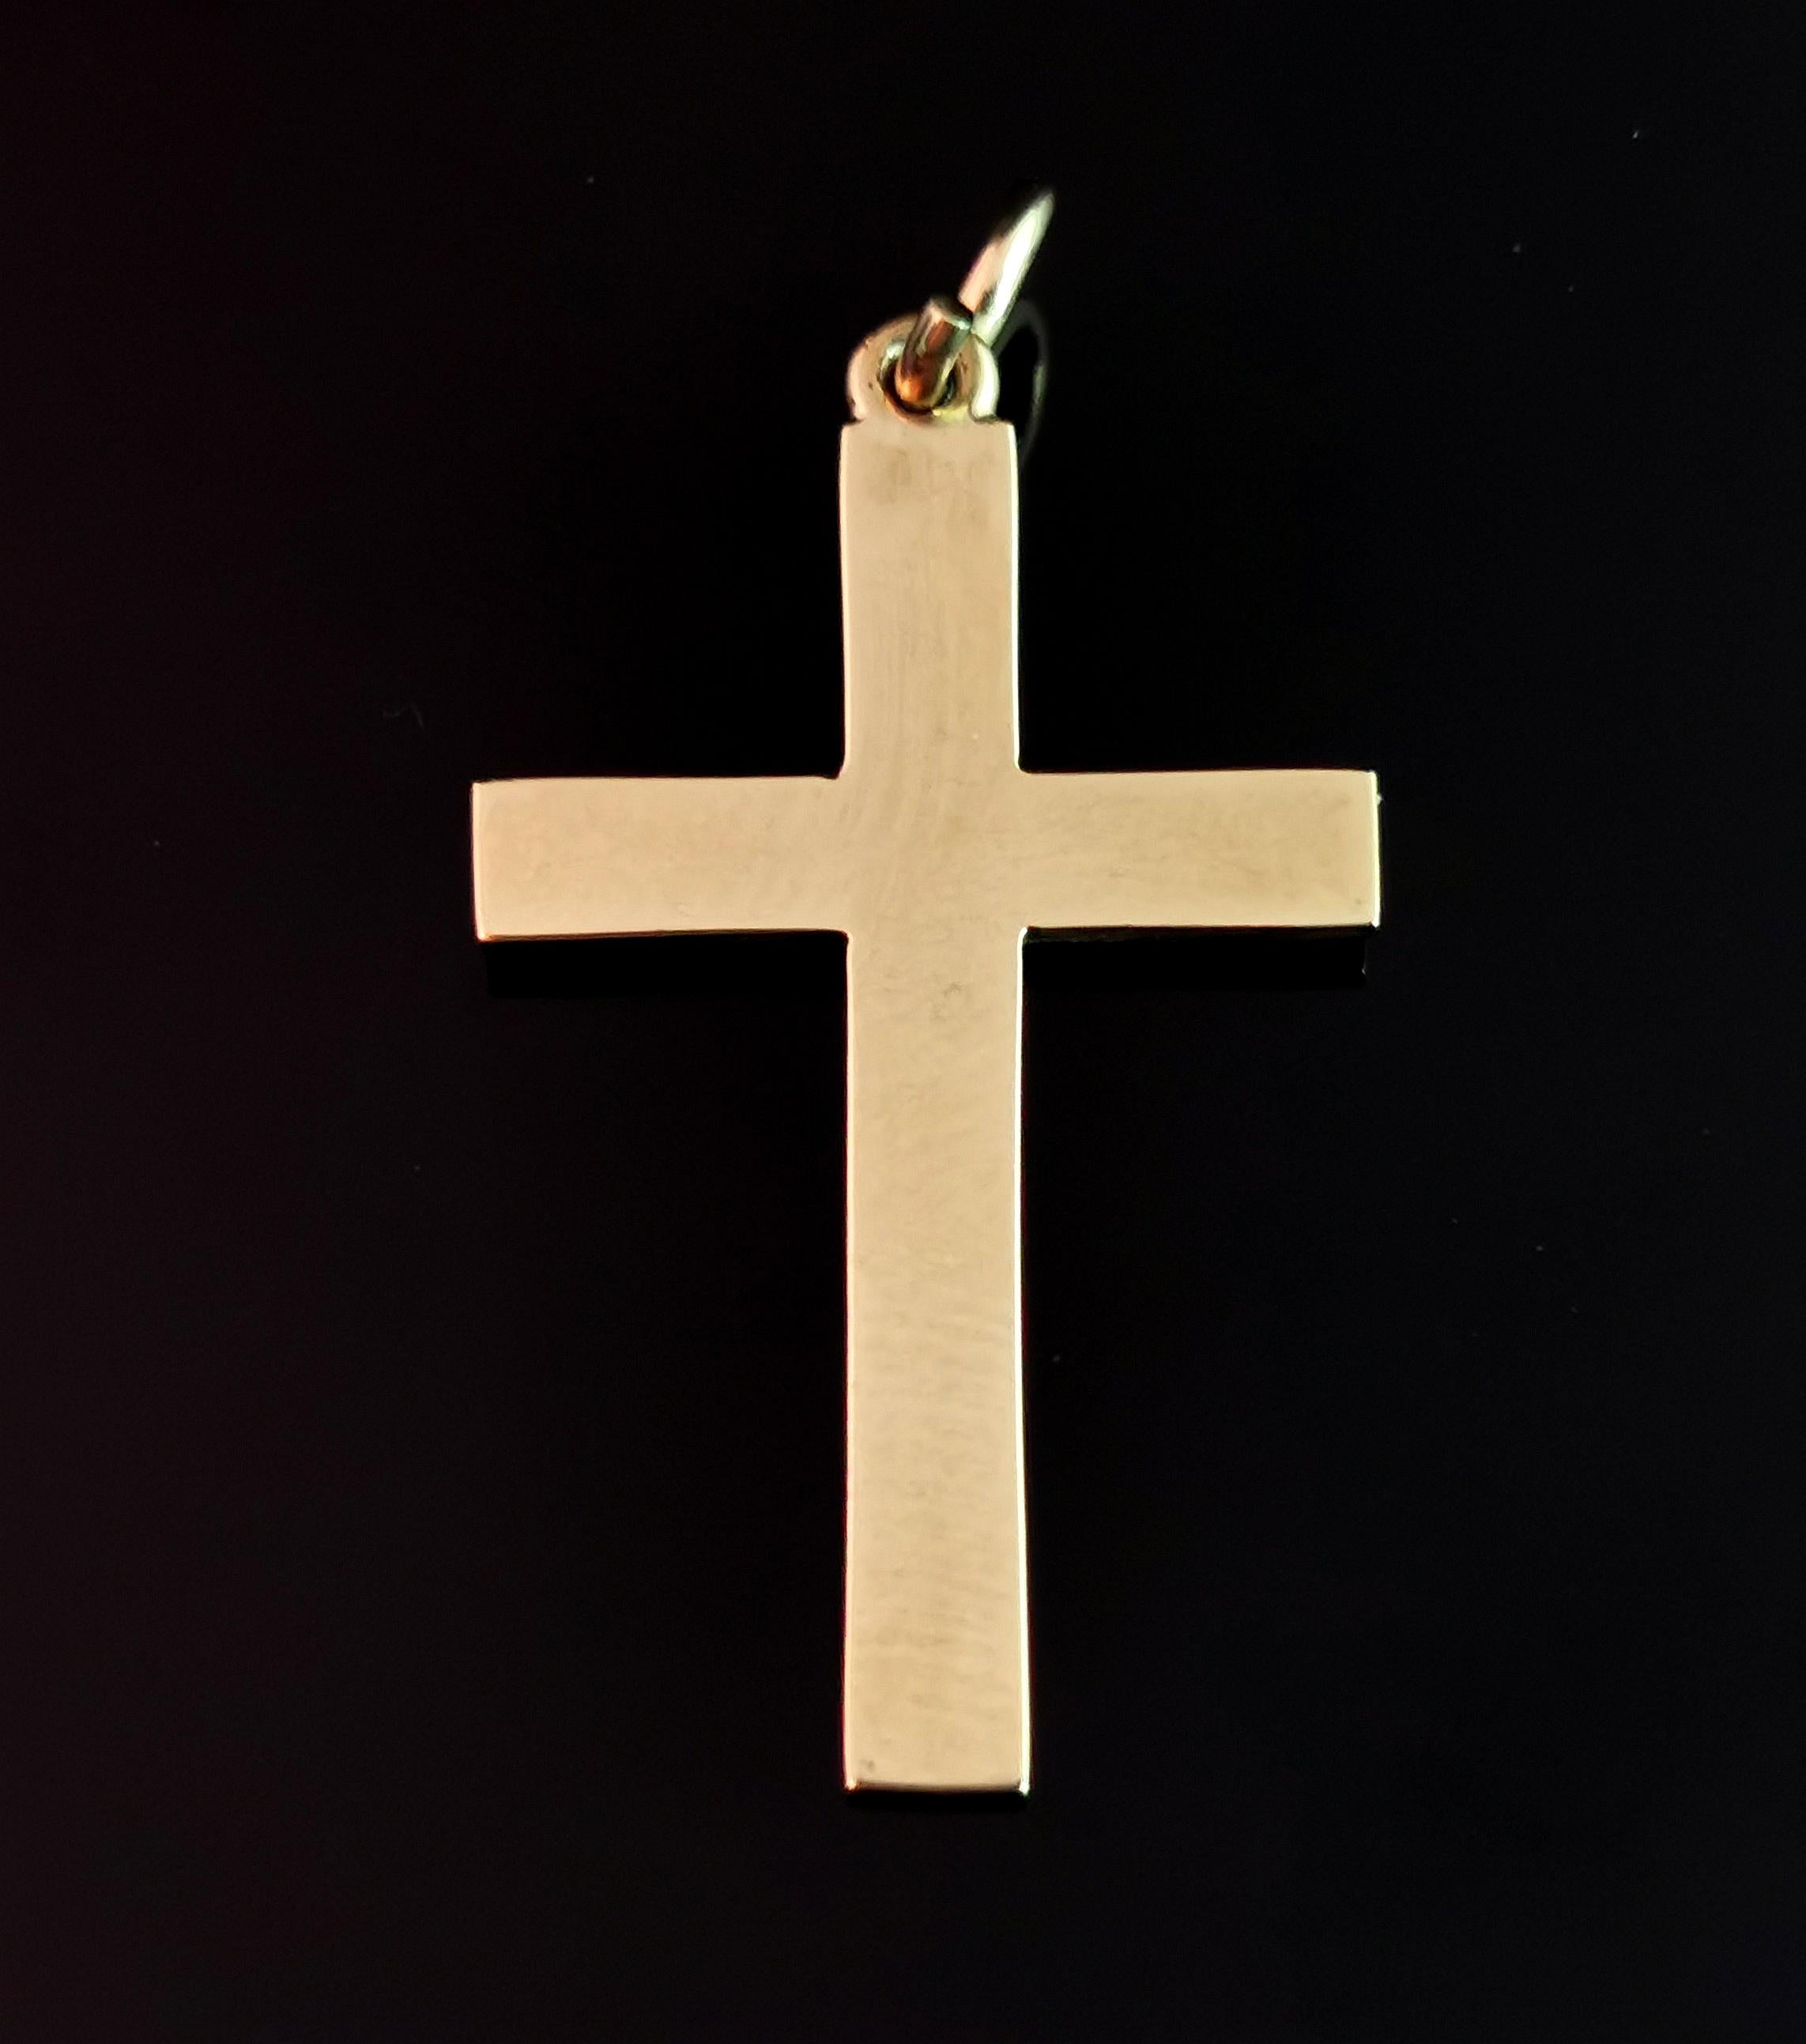 An attractive vintage, Mid-century 9kt yellow gold Cross pendant.

It has a smooth polished, plain finish the yellow gold having a nice rich tone.

Made by the renowned and highly respected maker Deakin and Francis, Deakin and Francis pieces are